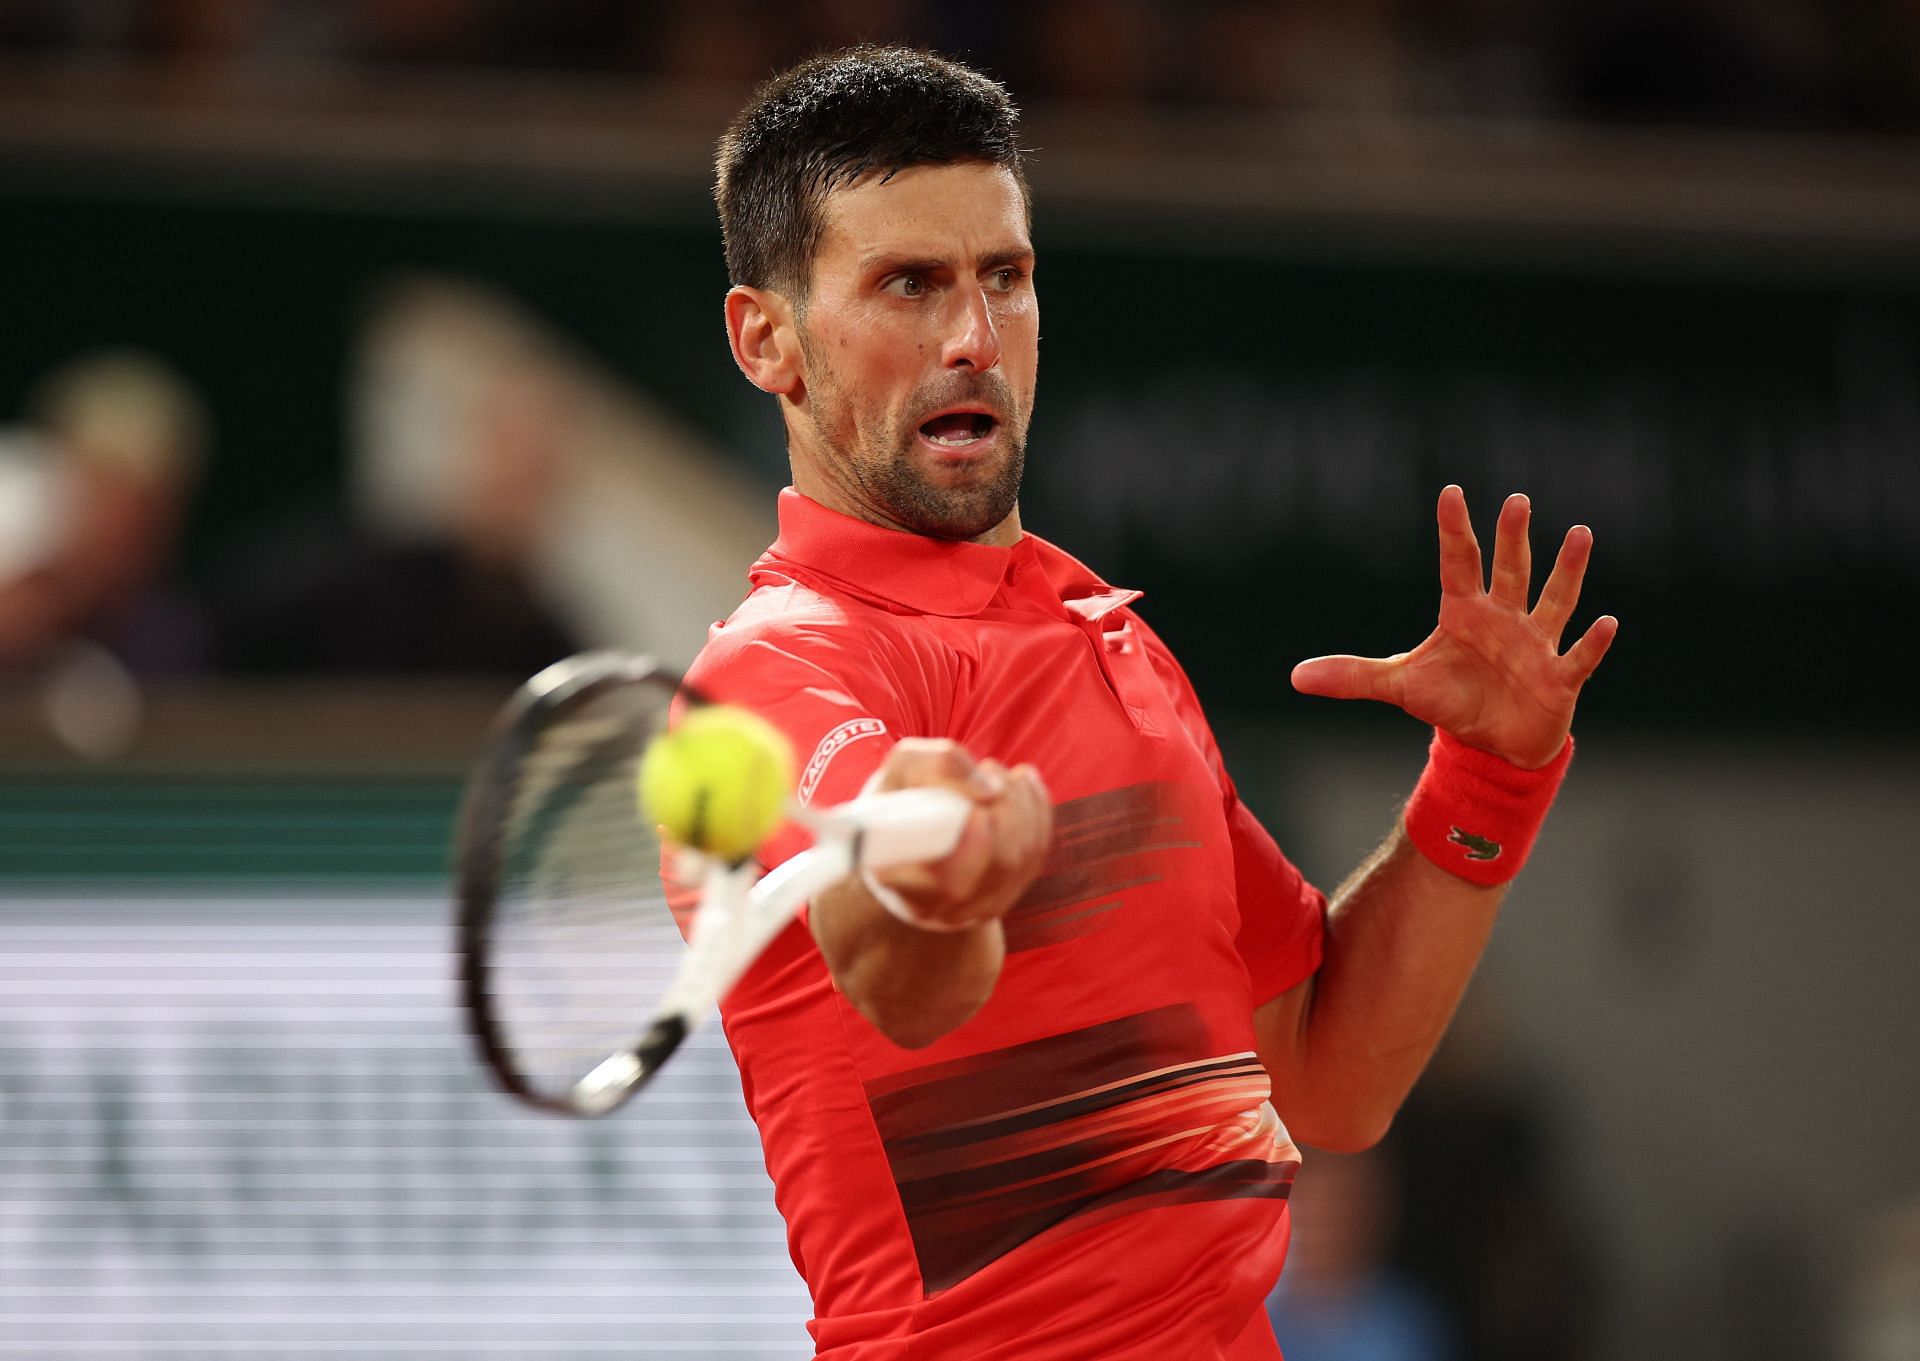 Djokovic at the 2022 French Open